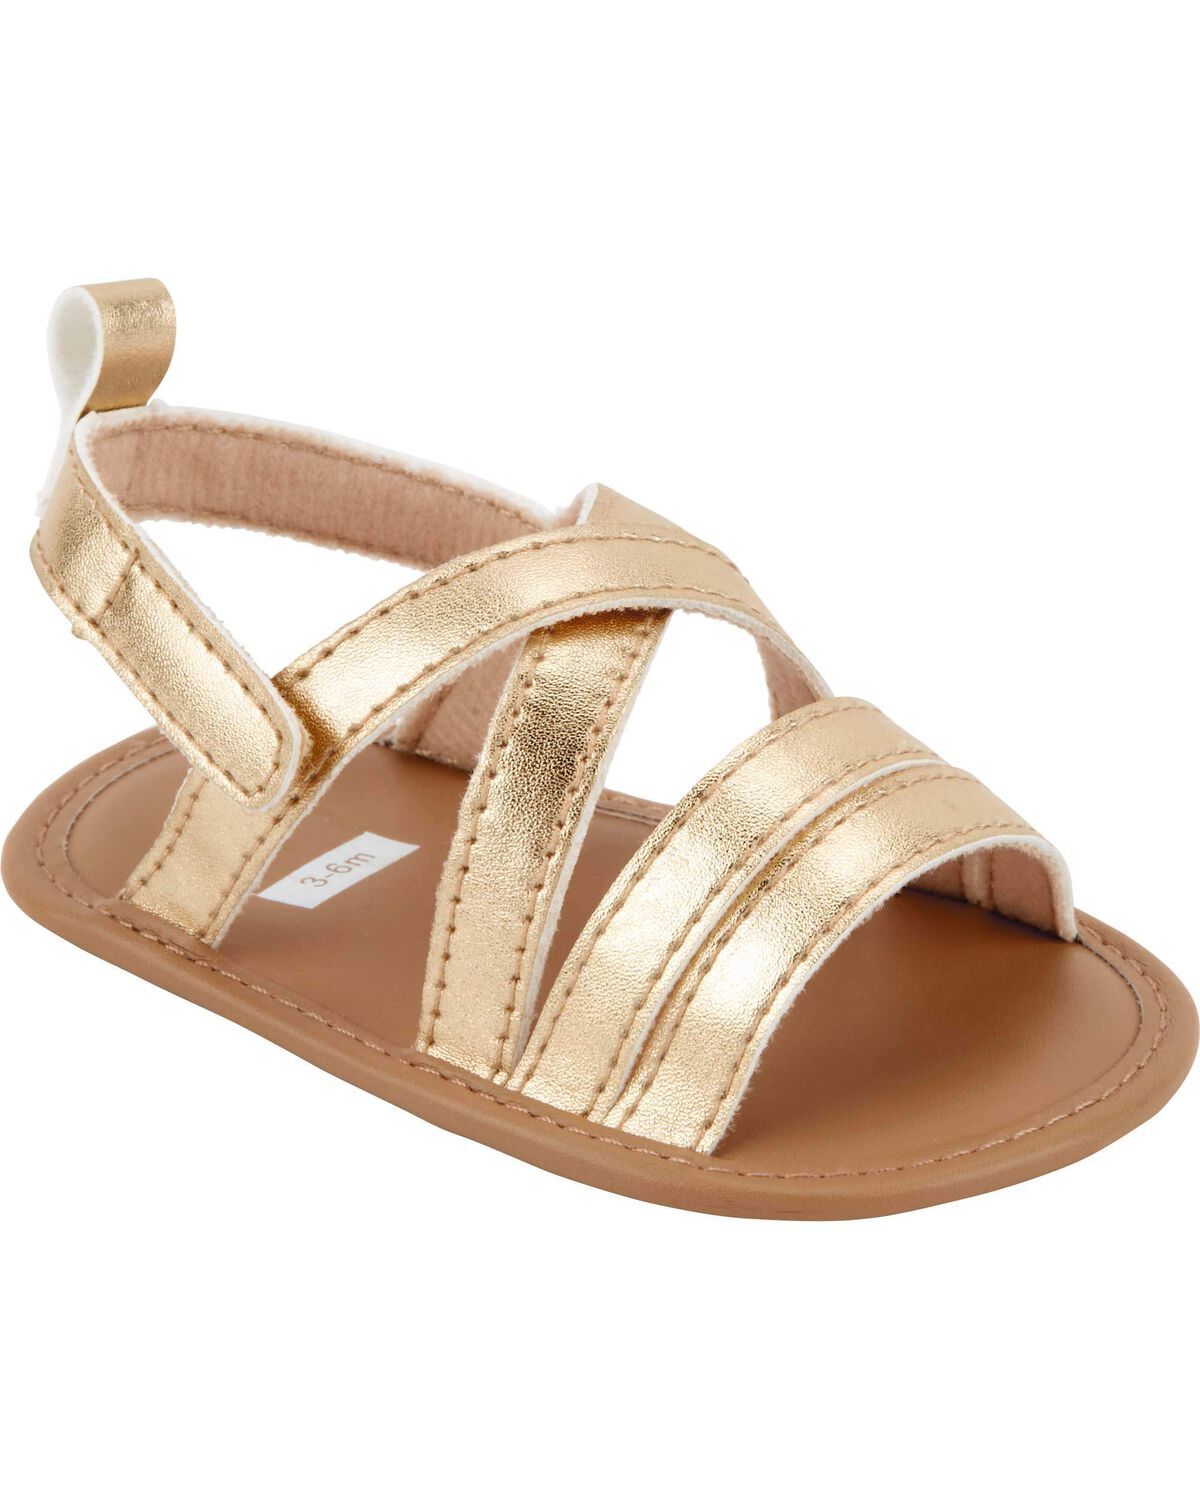 Baby Strappy Sandal Baby Shoes | Carter's